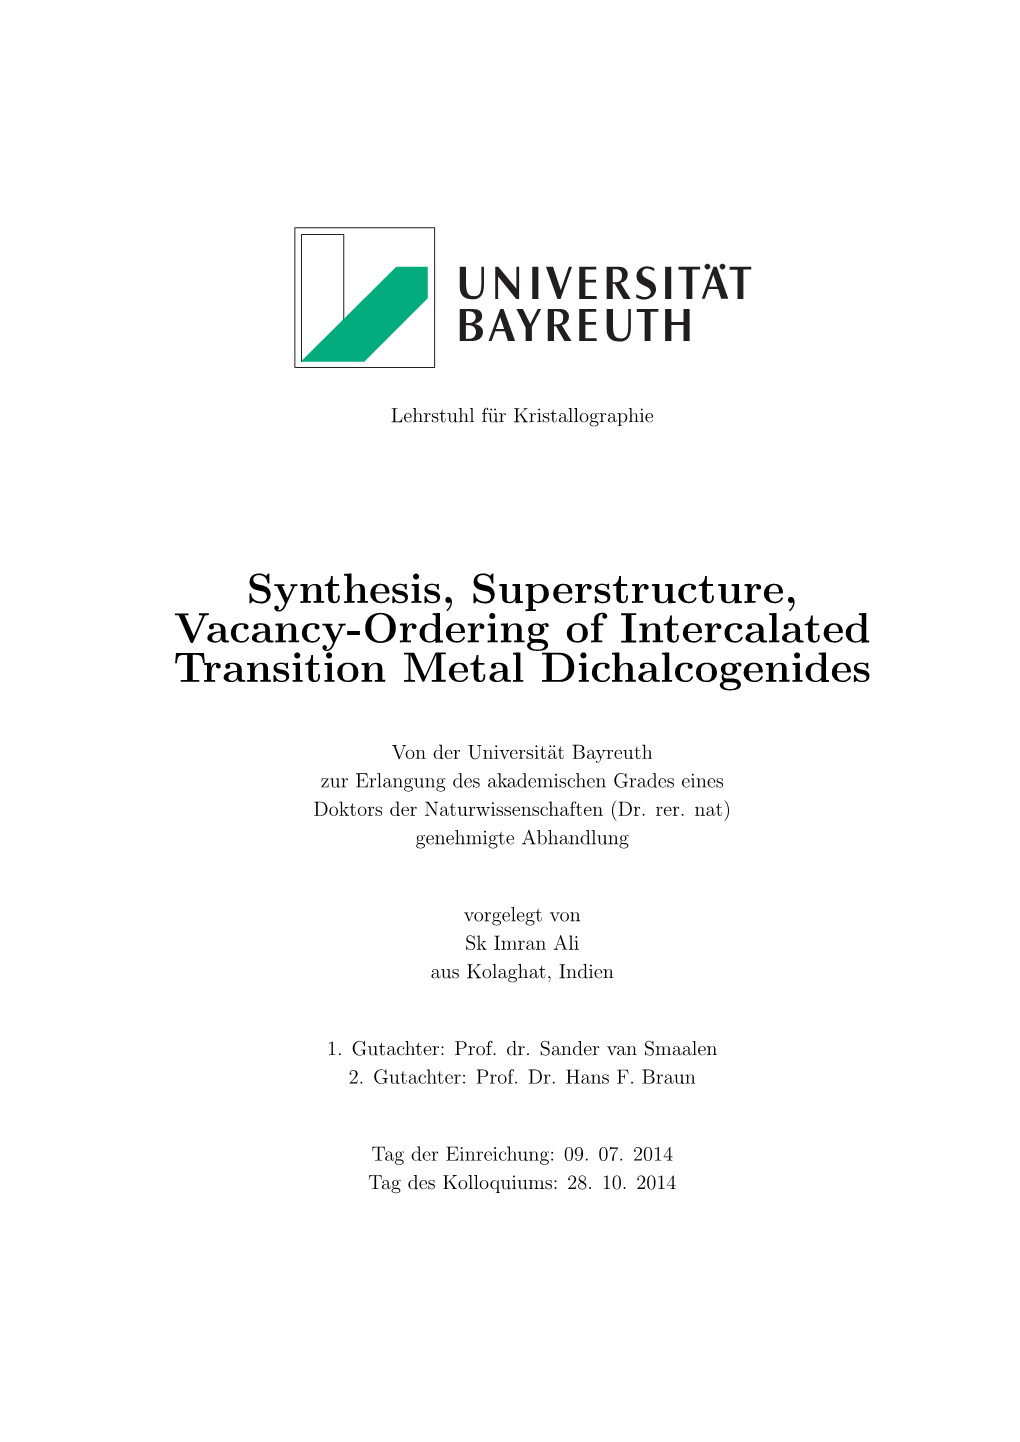 Synthesis, Superstructure, Vacancy-Ordering of Intercalated Transition Metal Dichalcogenides